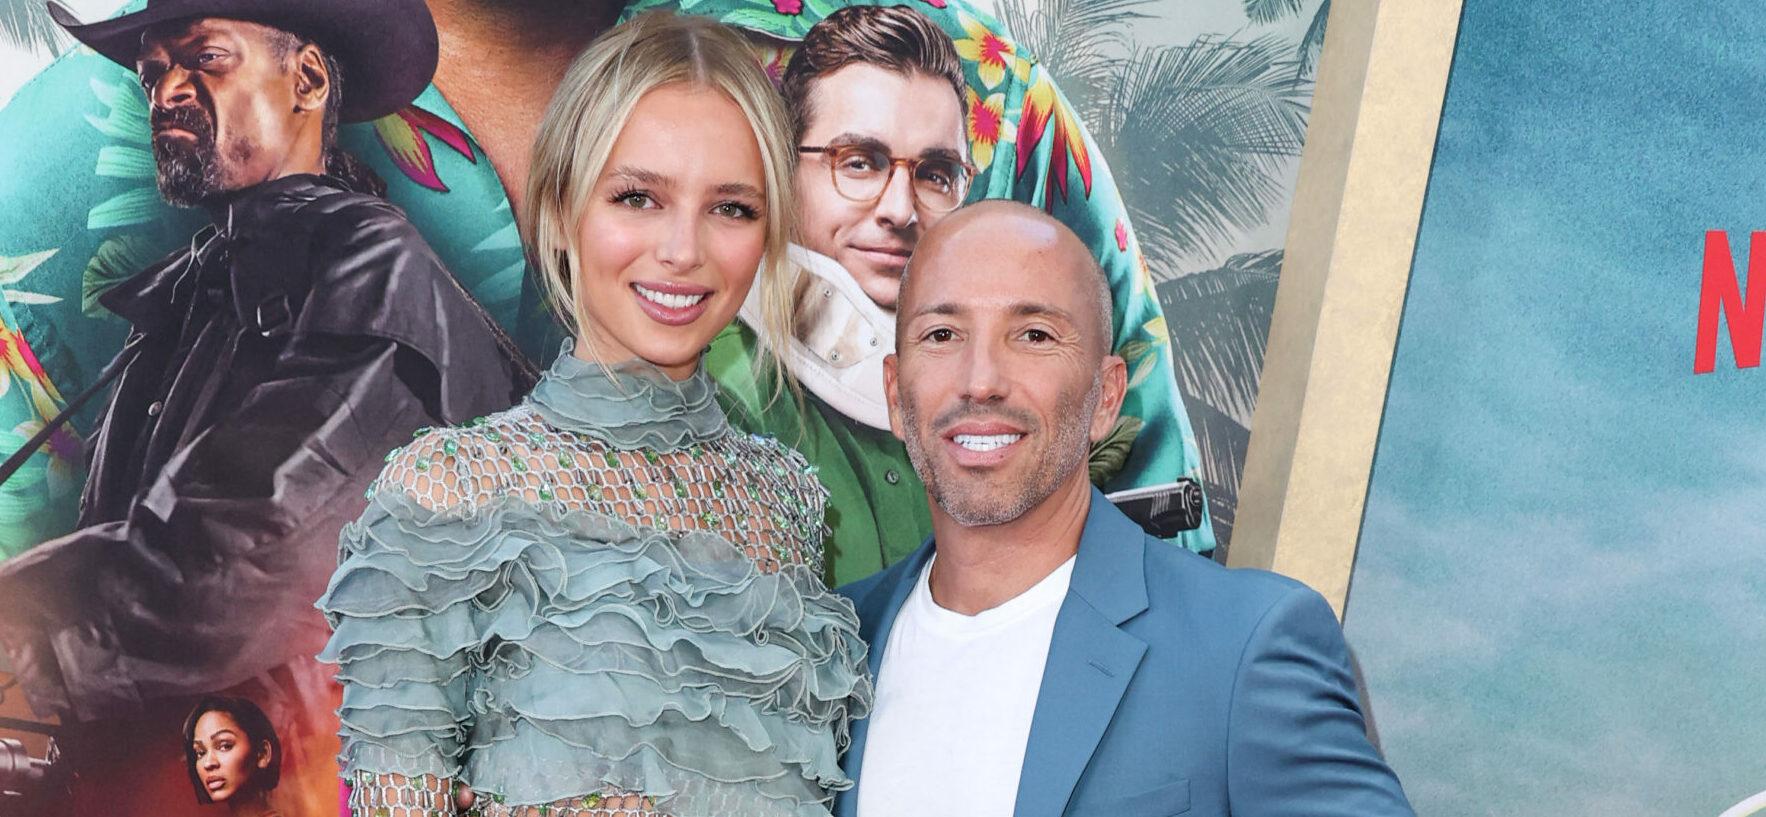 World Premiere Of Netflix's 'Day Shift' held at Regal Cinemas LA Live Stadium 14 on August 10, 2022 in Los Angeles, California, United States. 11 Aug 2022 Pictured: Marie-lou Nurk, Jason Oppenheim.